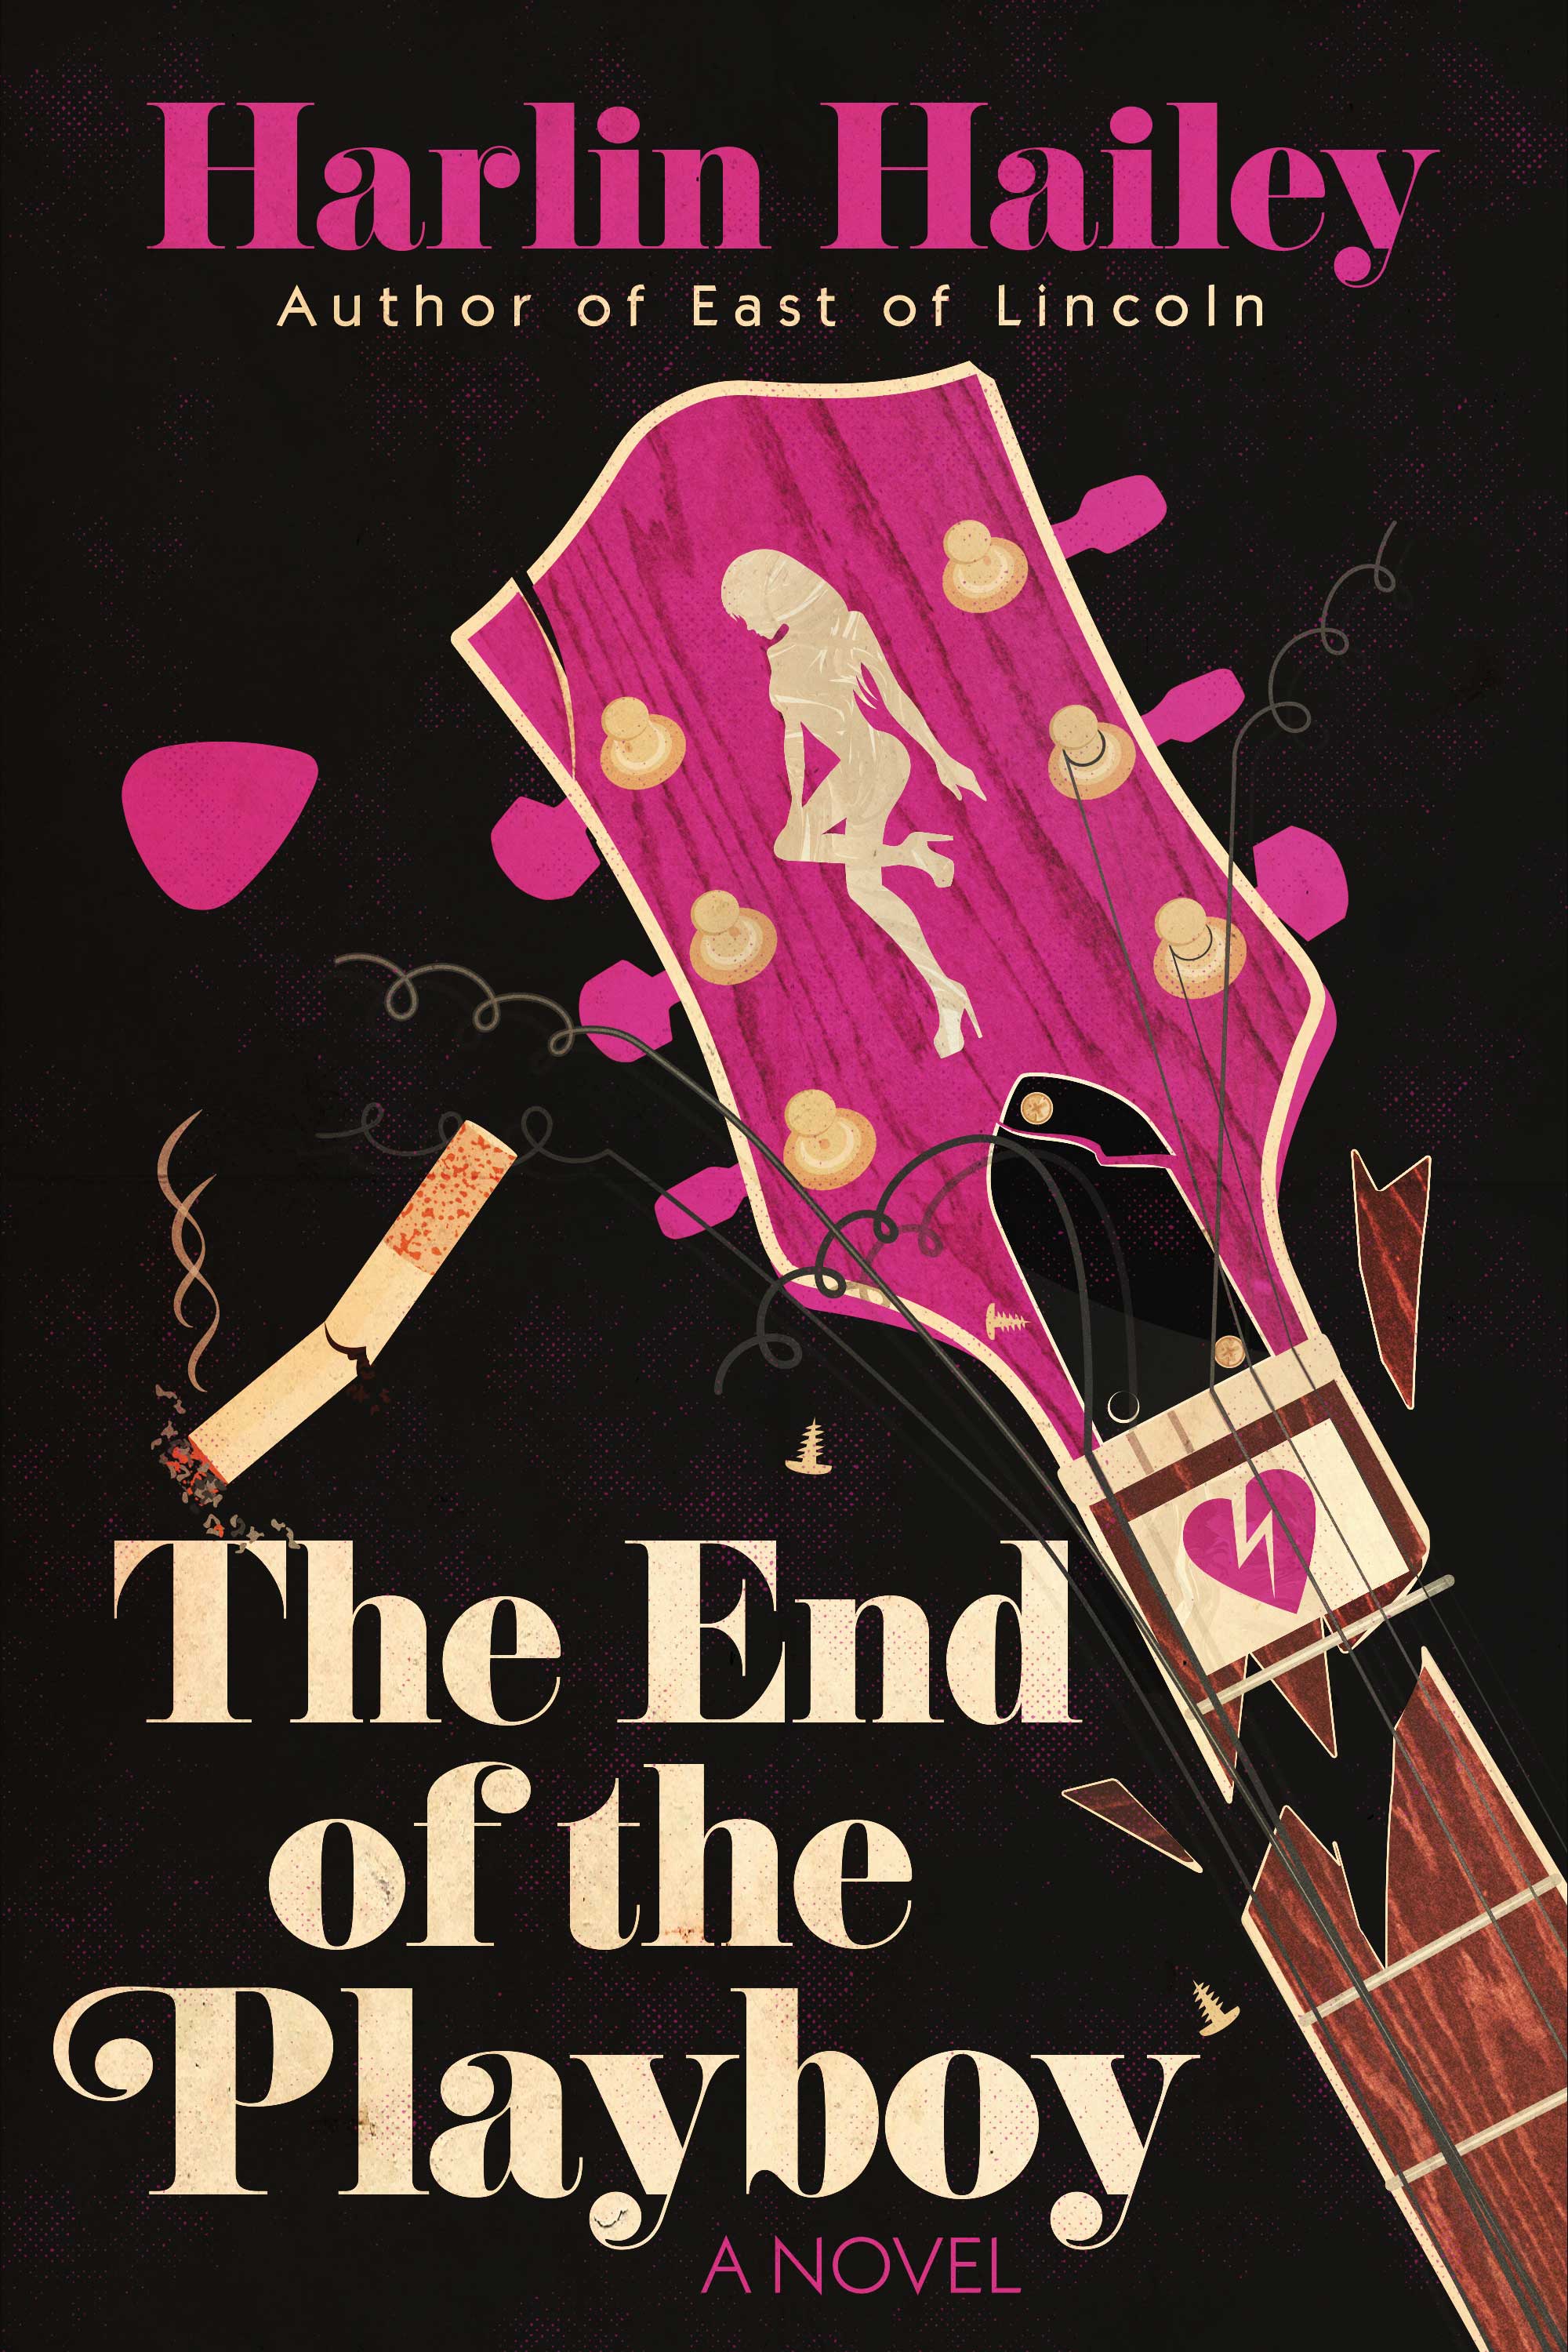 The End of the Playboy by Harlin Hailey